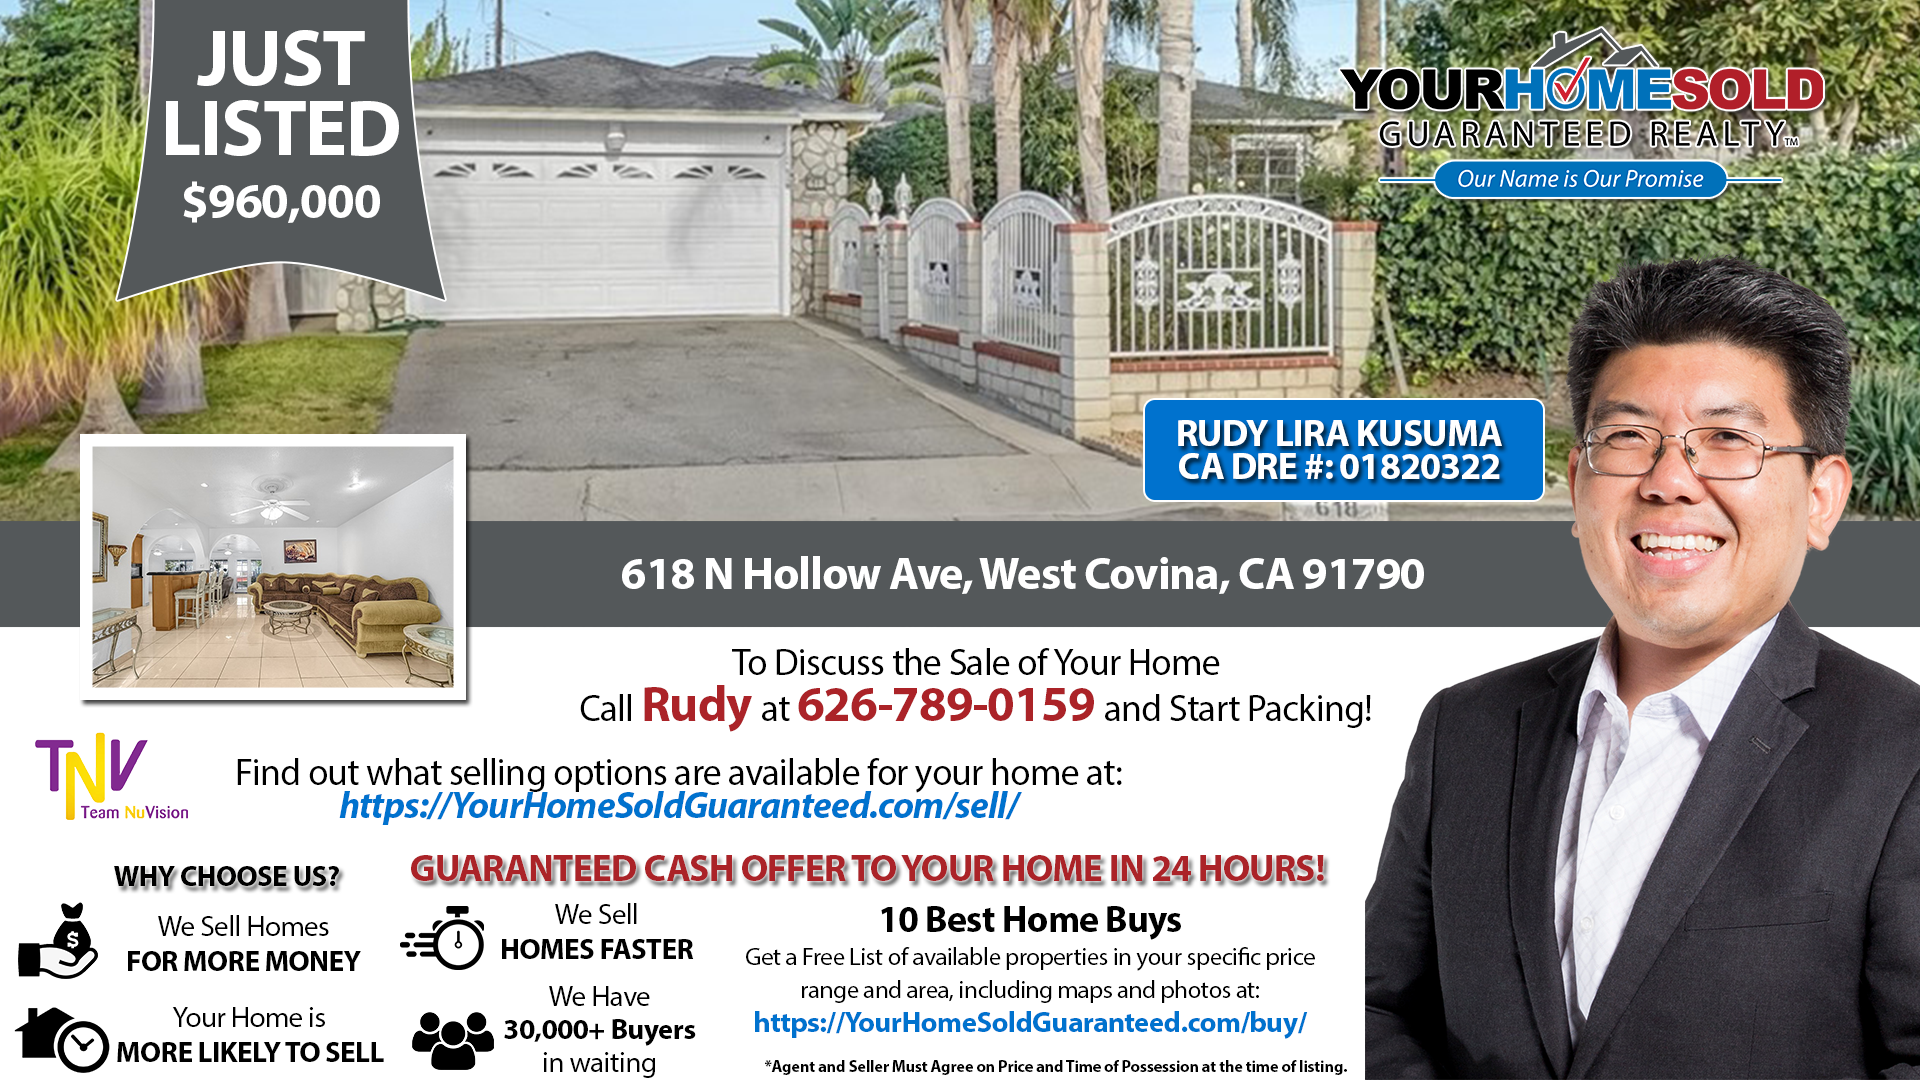 618 N Hollow Ave, West Covina, CA 91790 - Rudy Lira Kusuma | BUY THIS HOME, I'LL BUY YOURS!